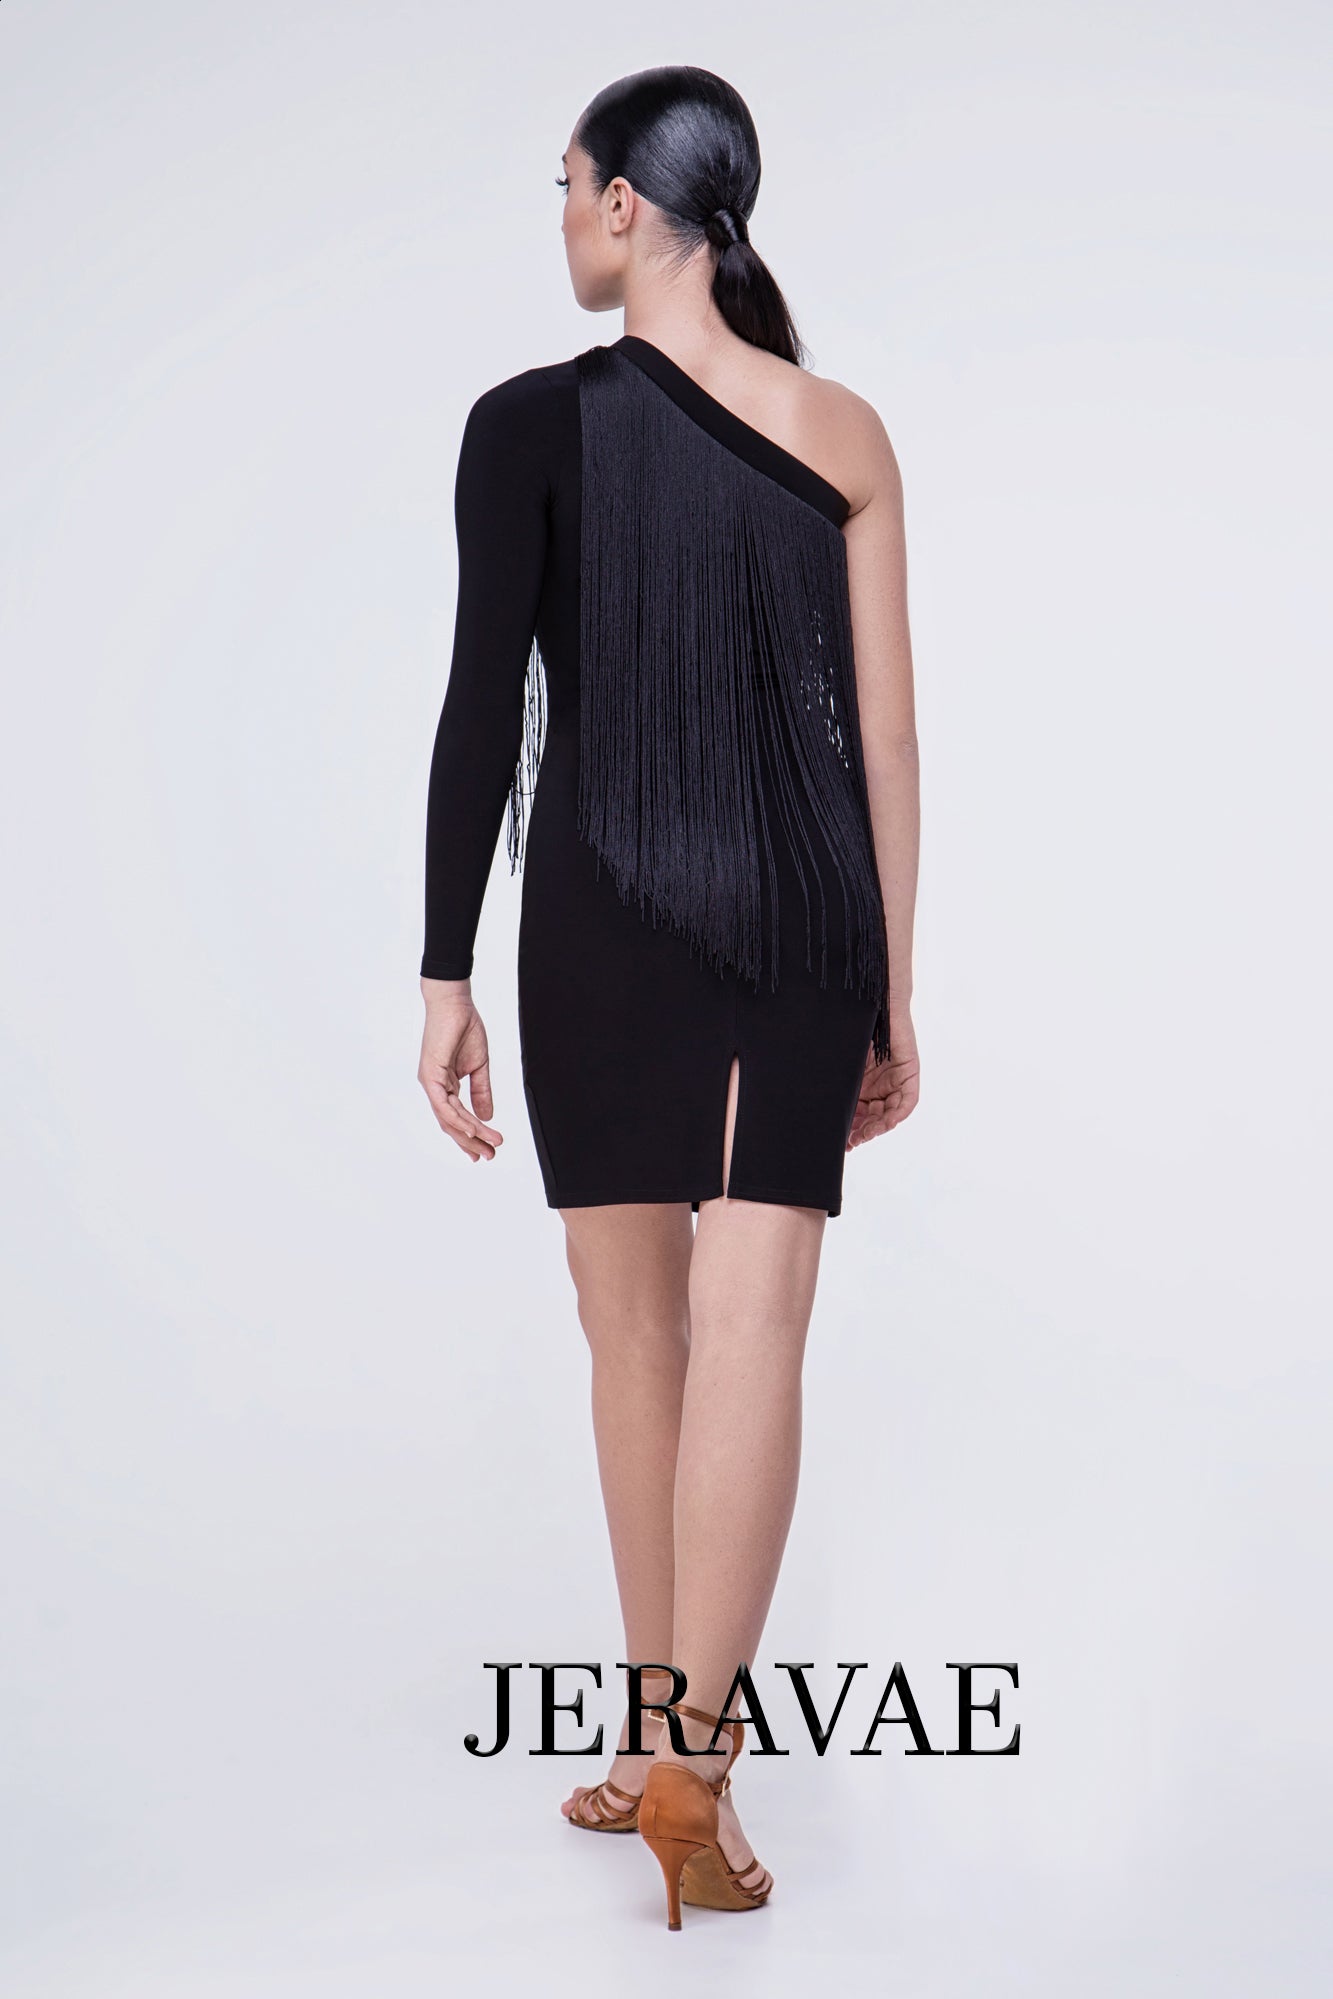 black practice dress with long fringe at top seam